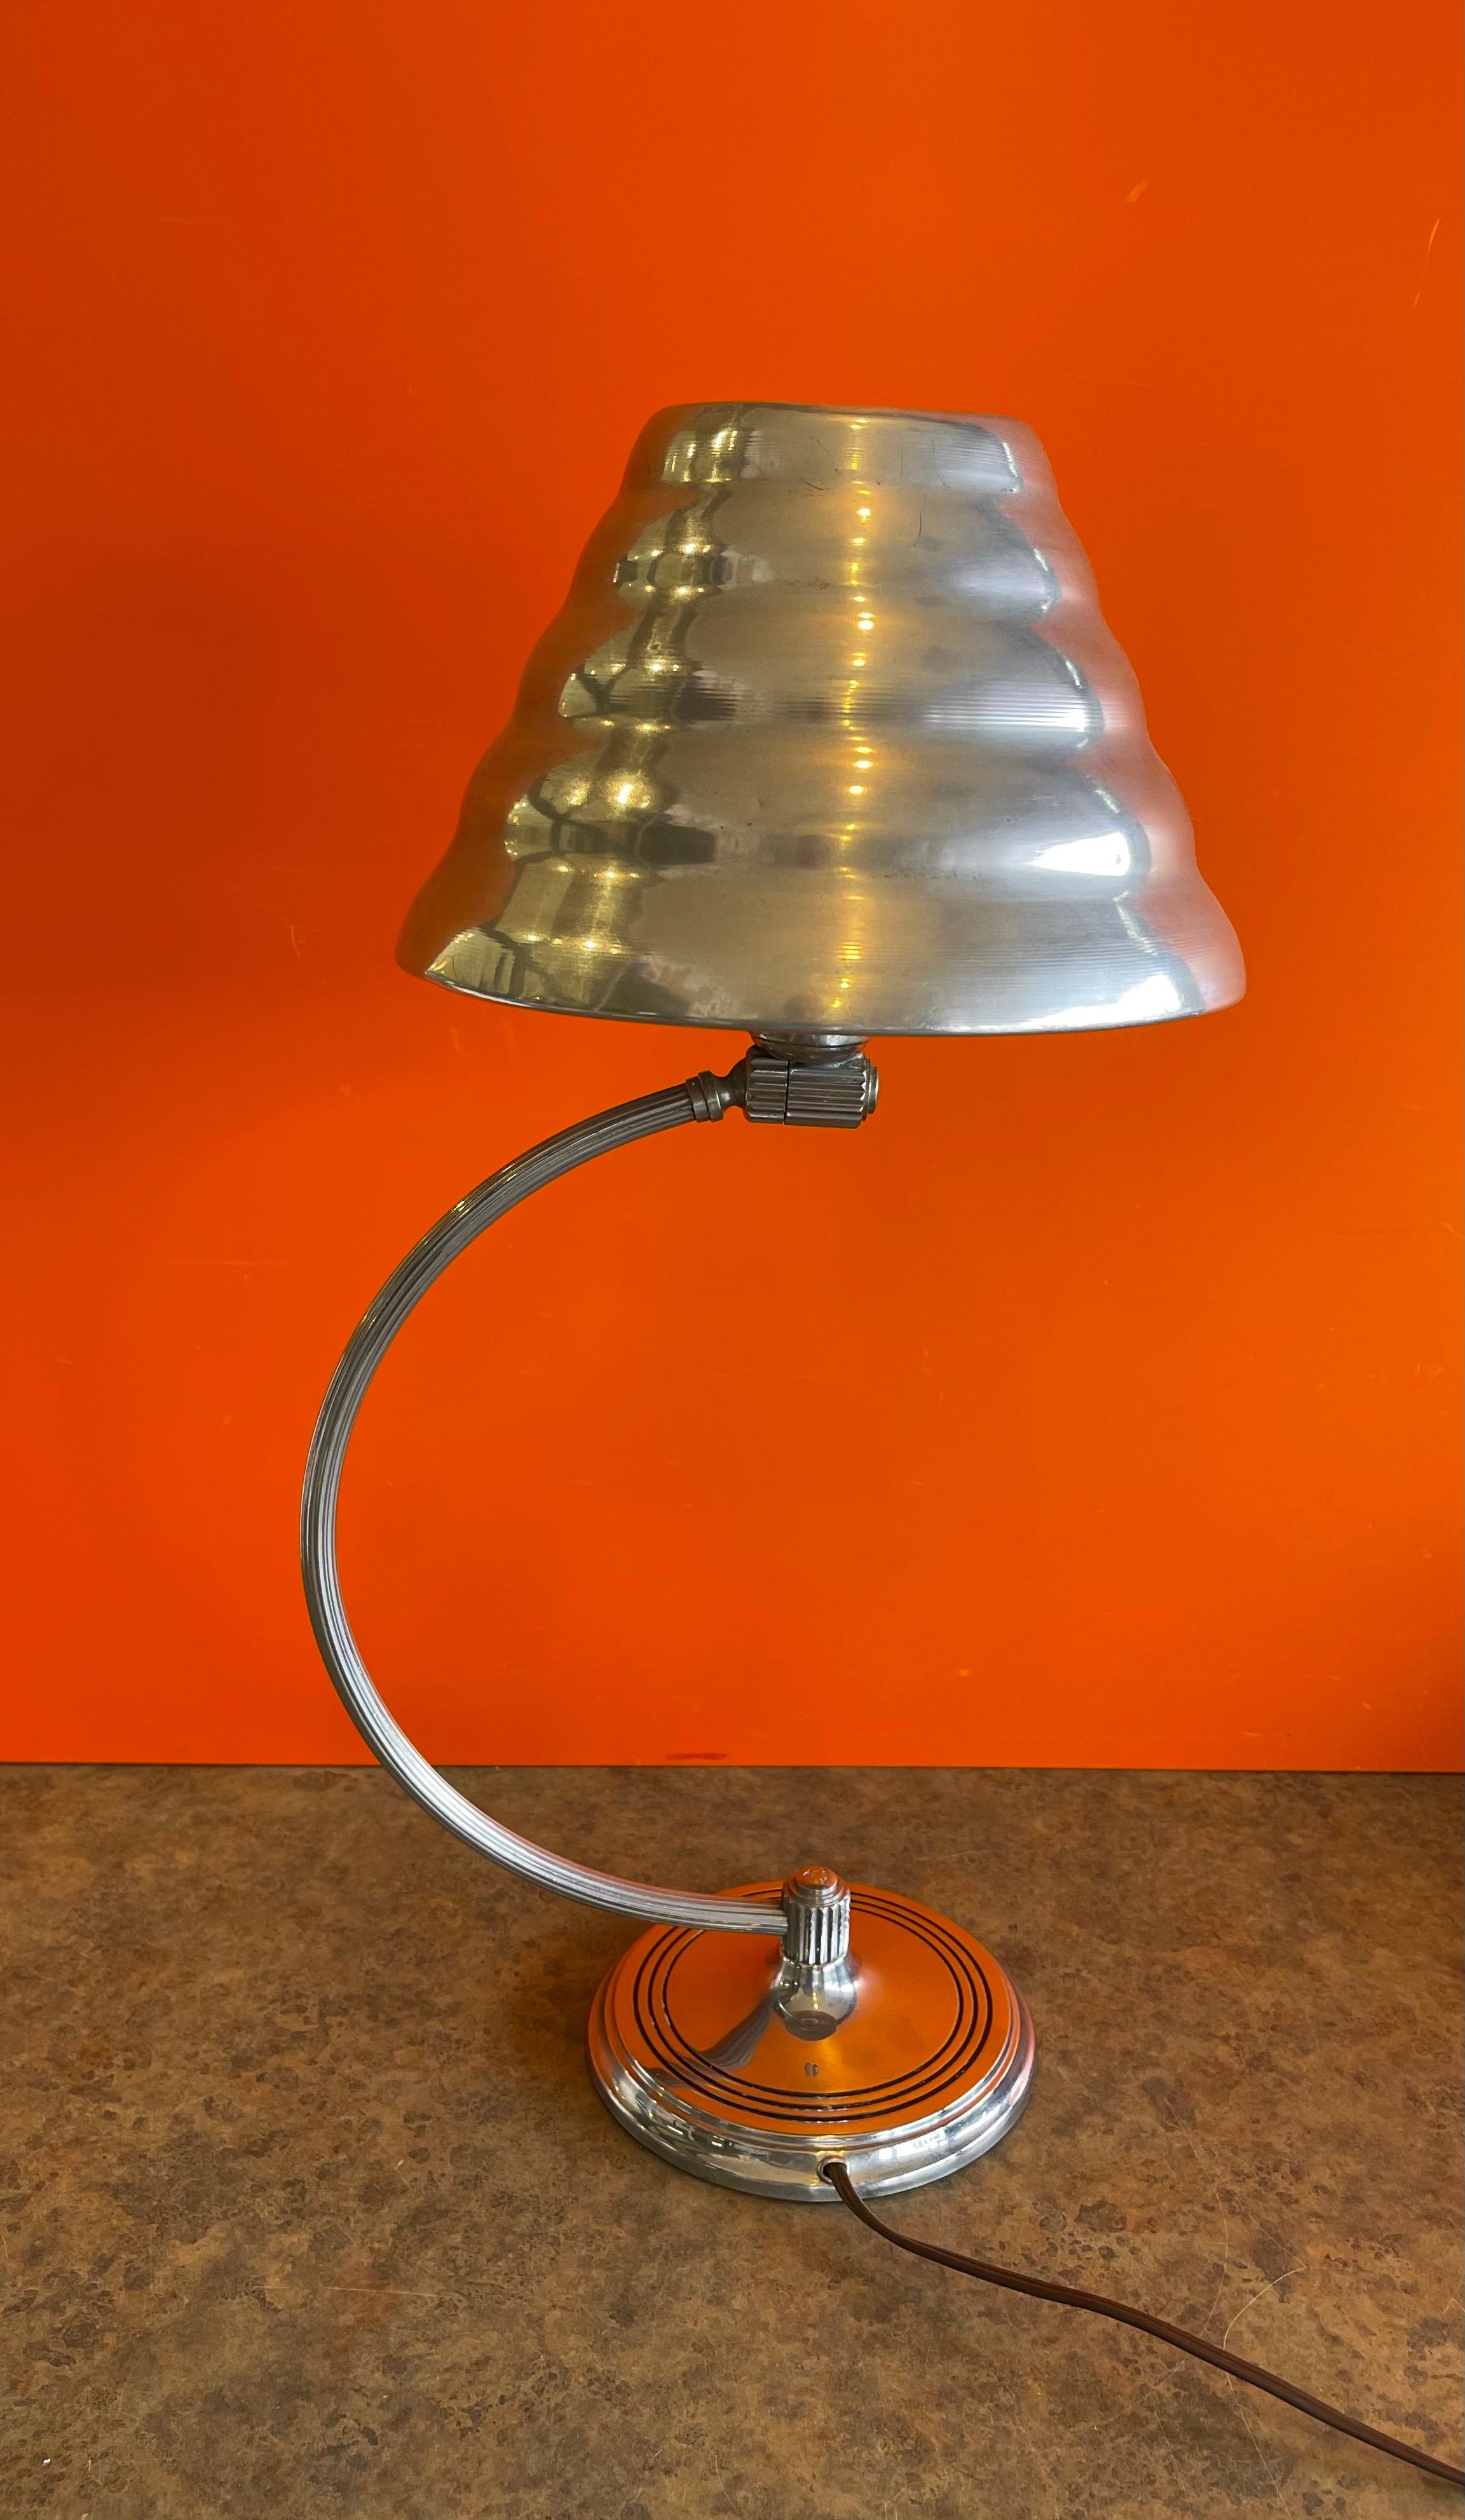 Art Deco arc desk lamp with rare tin shade by Chase & Co., circa 1930s. The lamp is in very good working condition and measure 6